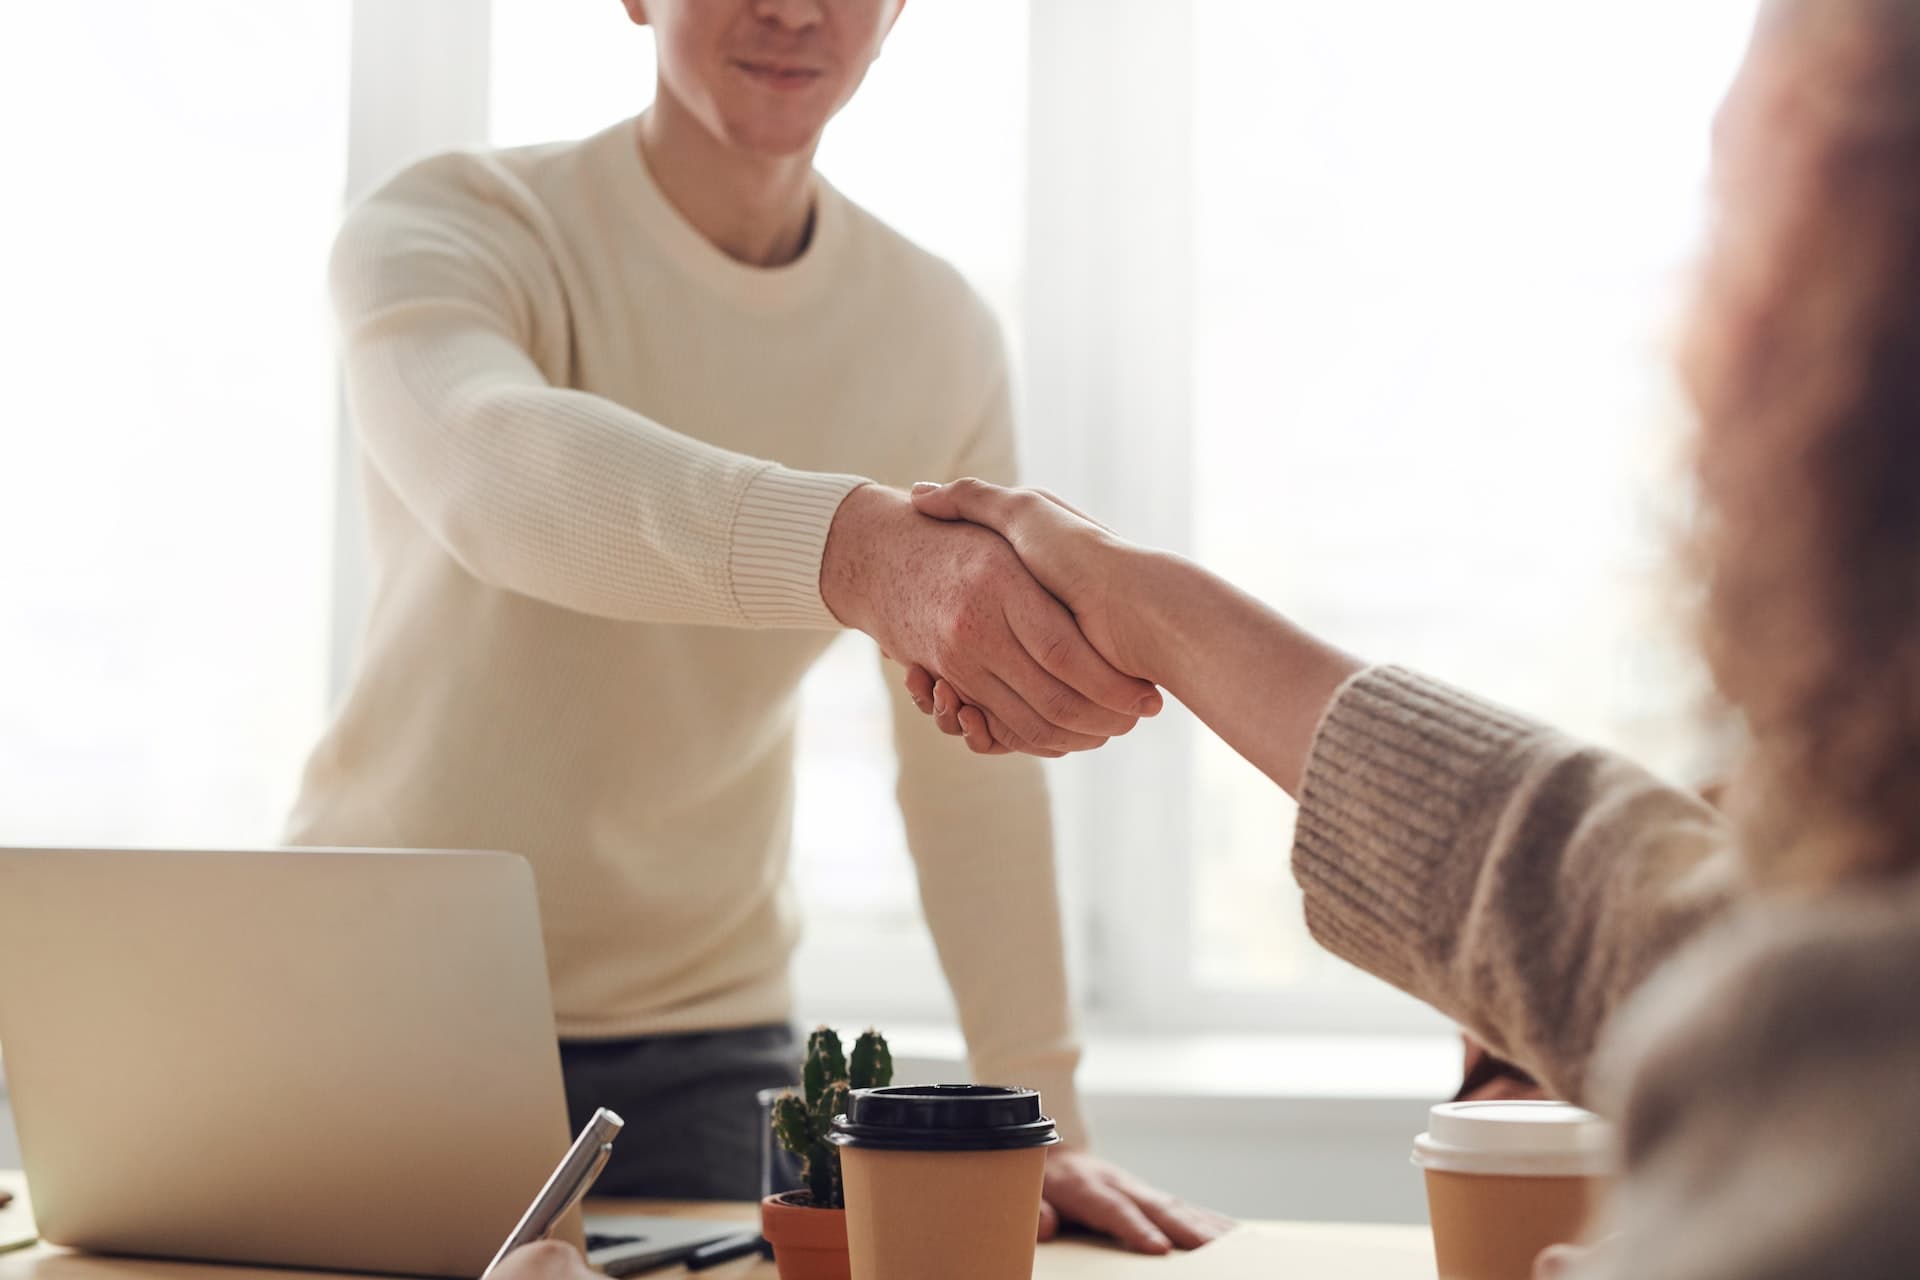 Man shaking woman's hand welcoming her to the office